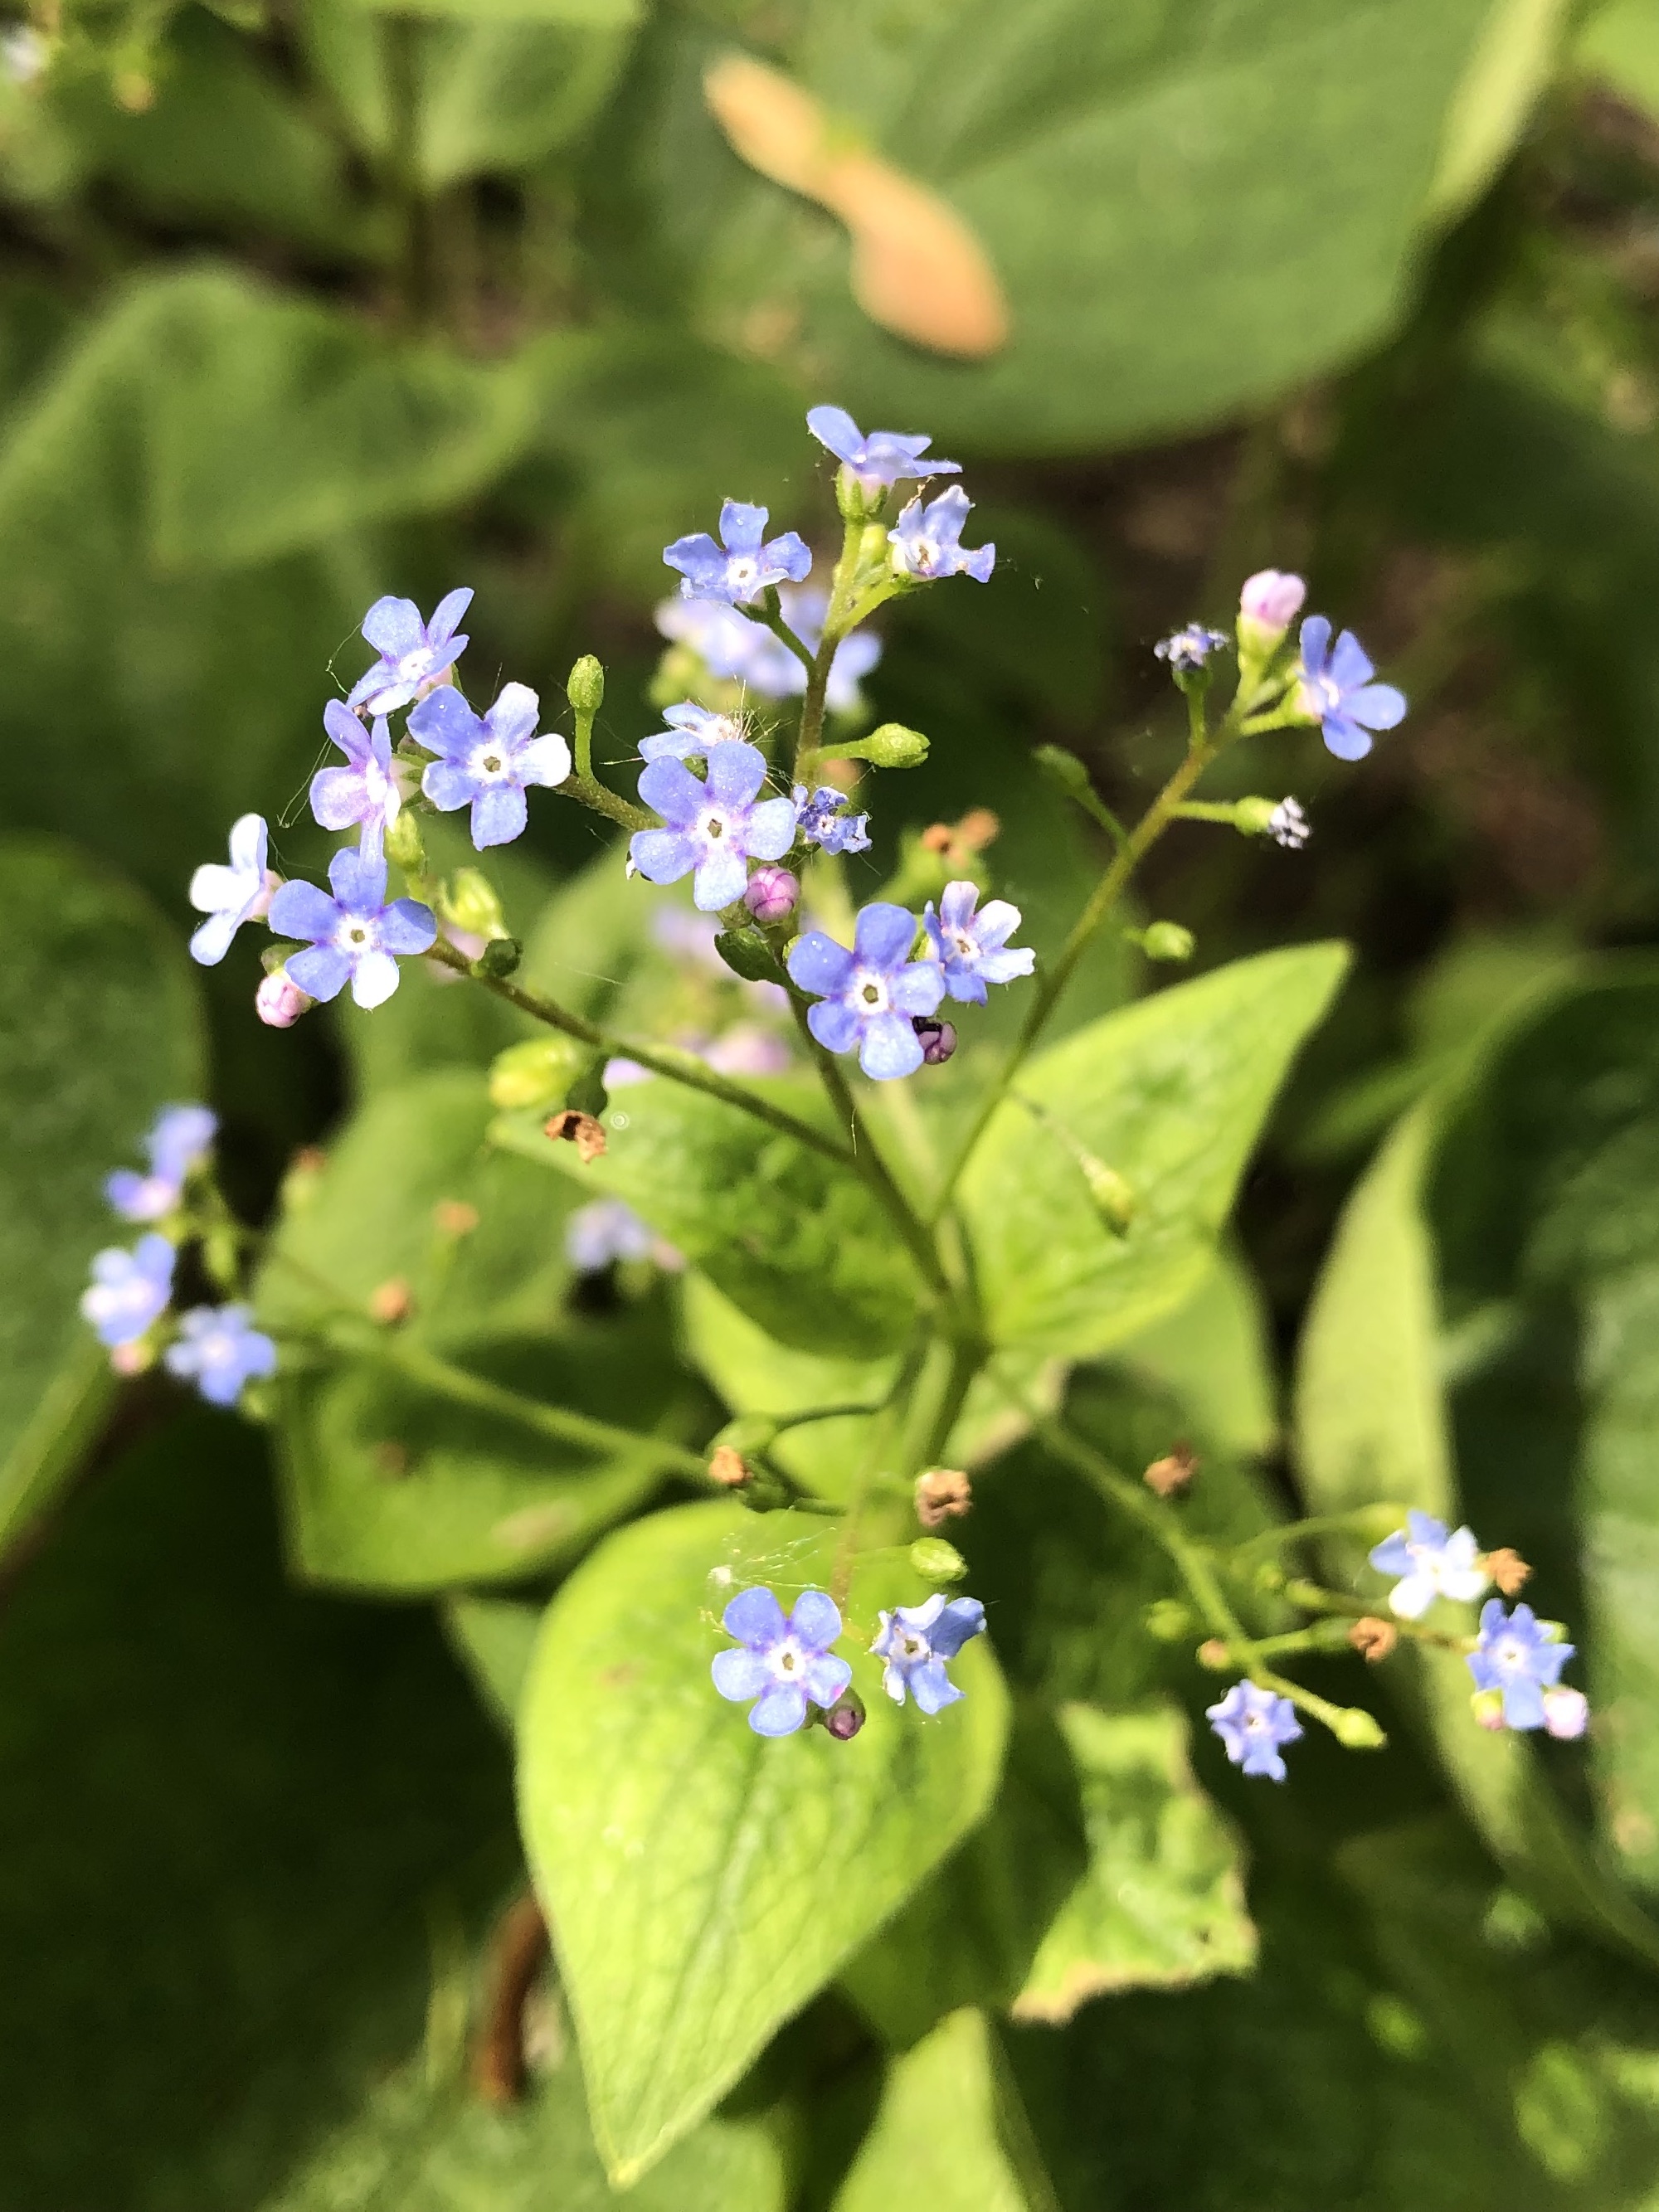 False Forget-Me-Not near Agawain Madison, Wisconsin on May 23, 2022